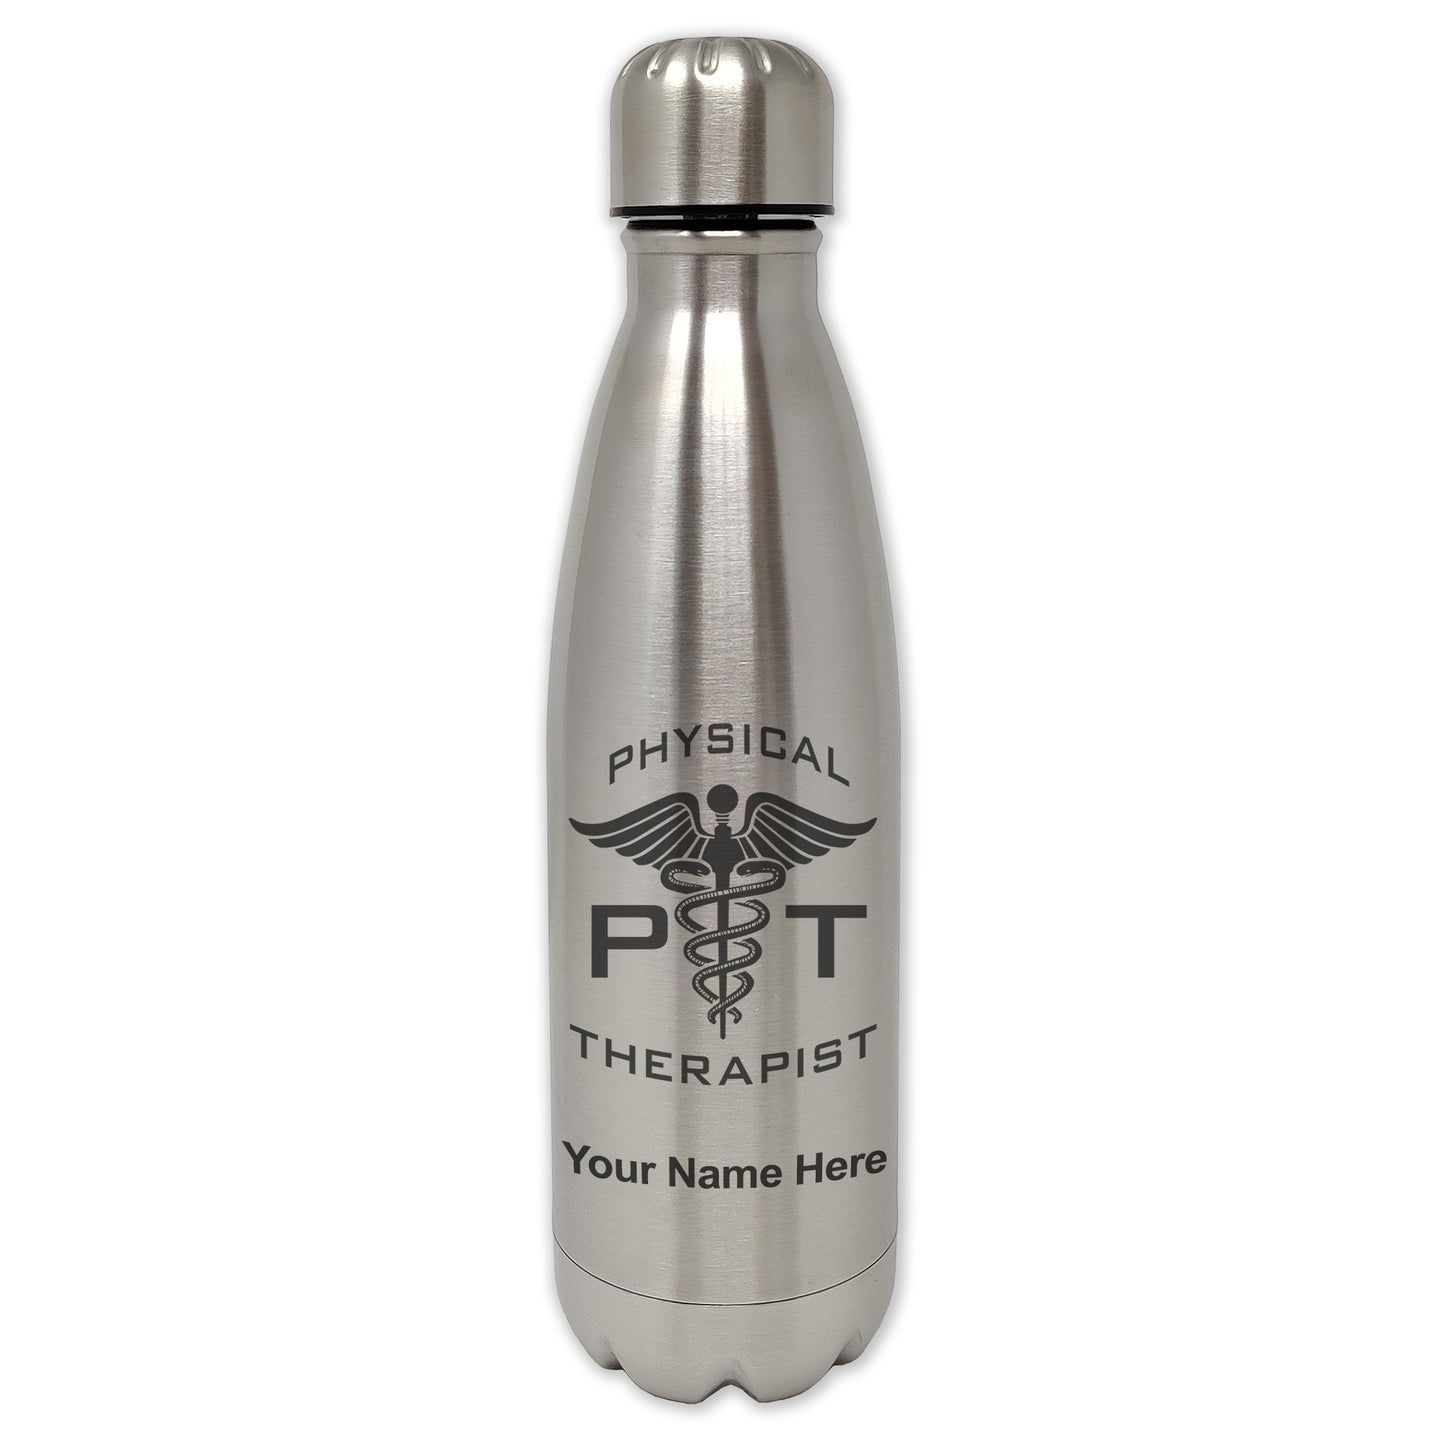 LaserGram Single Wall Water Bottle, PT Physical Therapist, Personalized Engraving Included